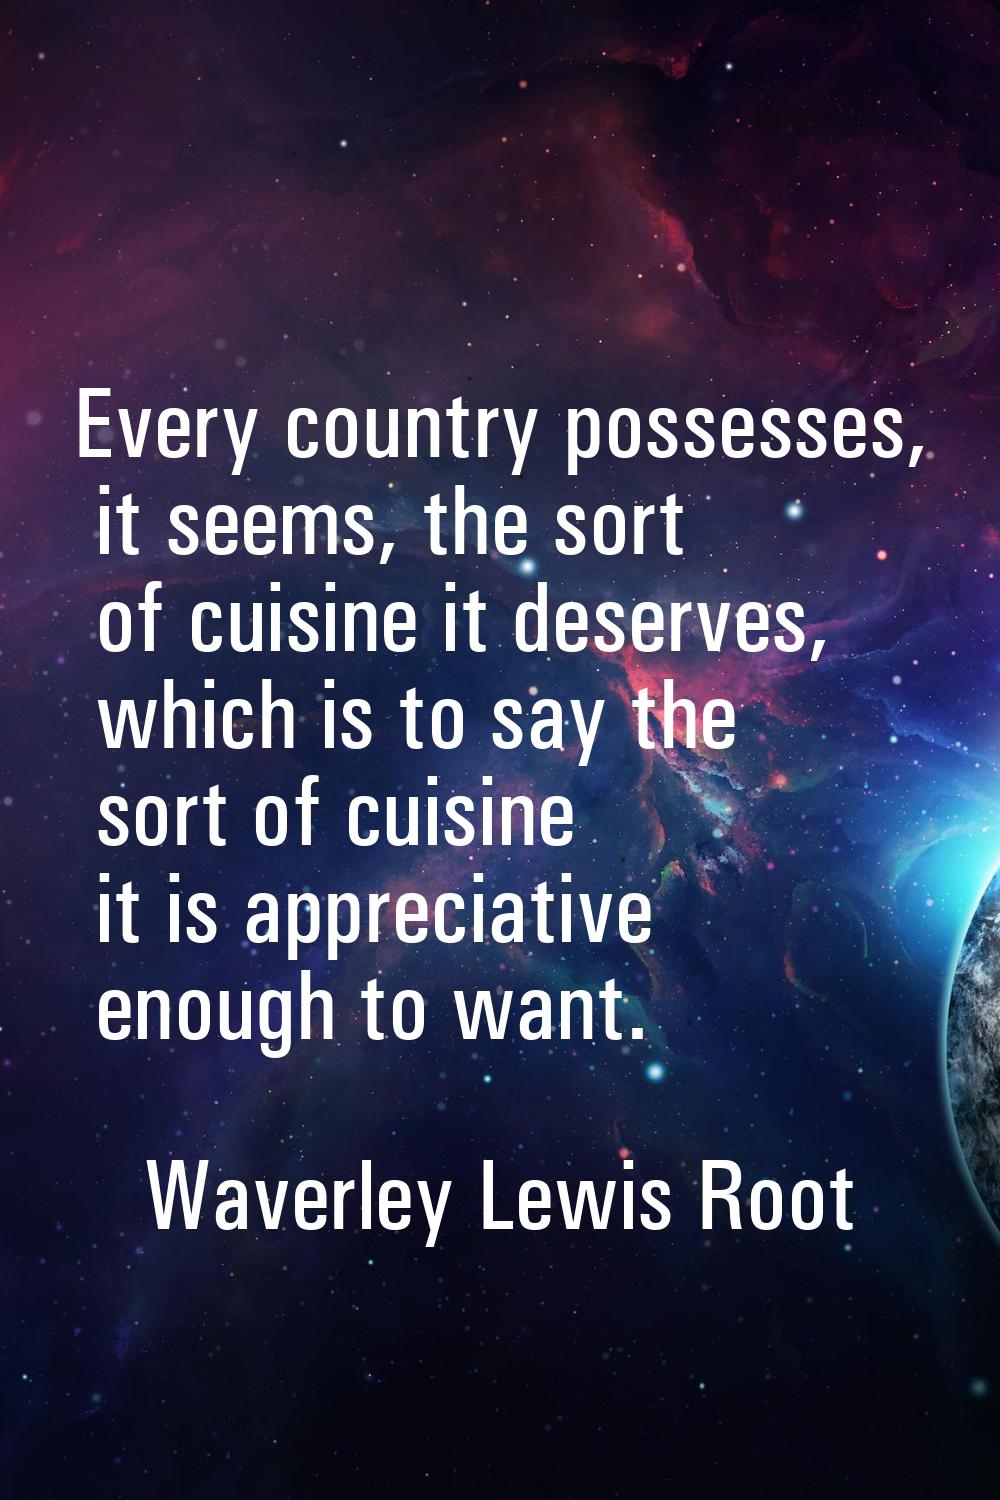 Every country possesses, it seems, the sort of cuisine it deserves, which is to say the sort of cui